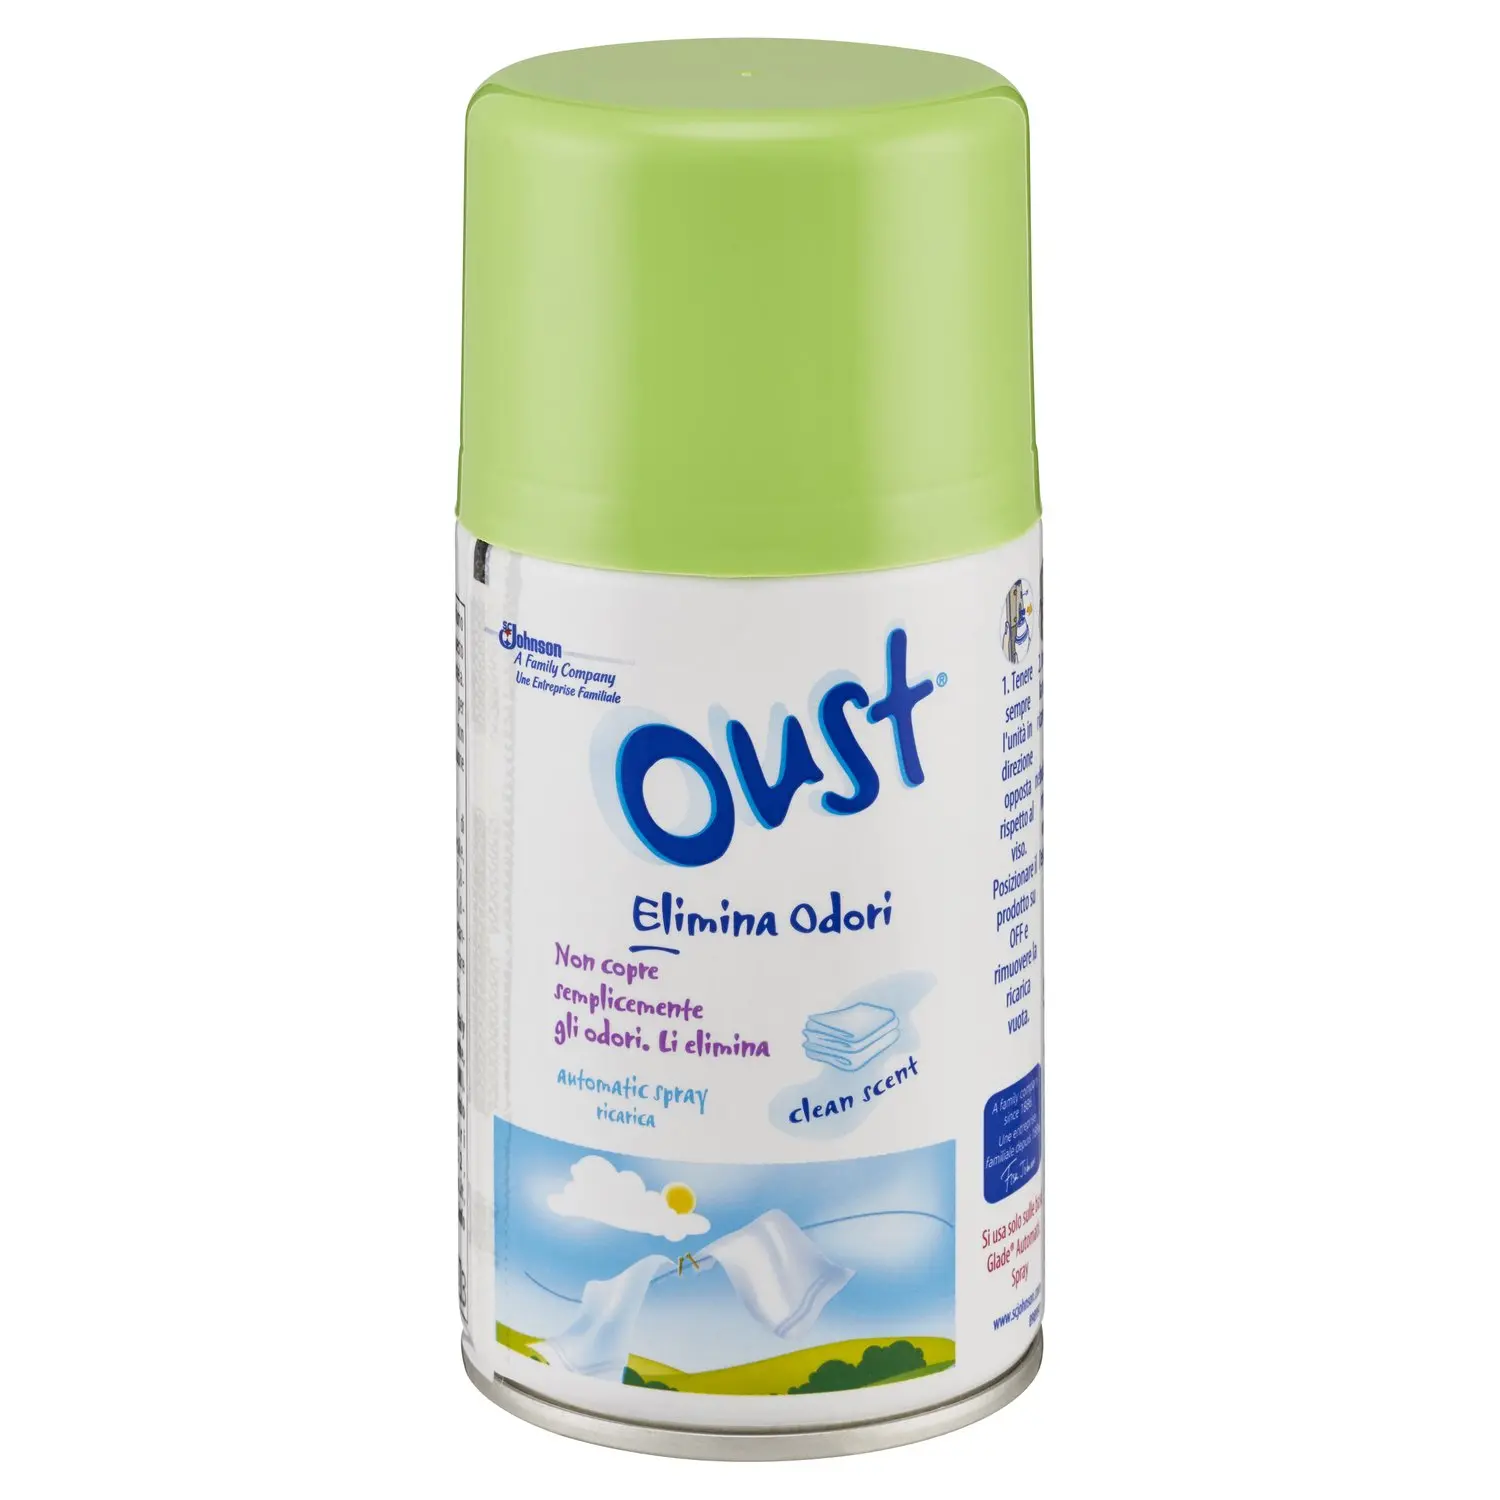 Oust Automatic Spray ricarica clean scent 269 ml